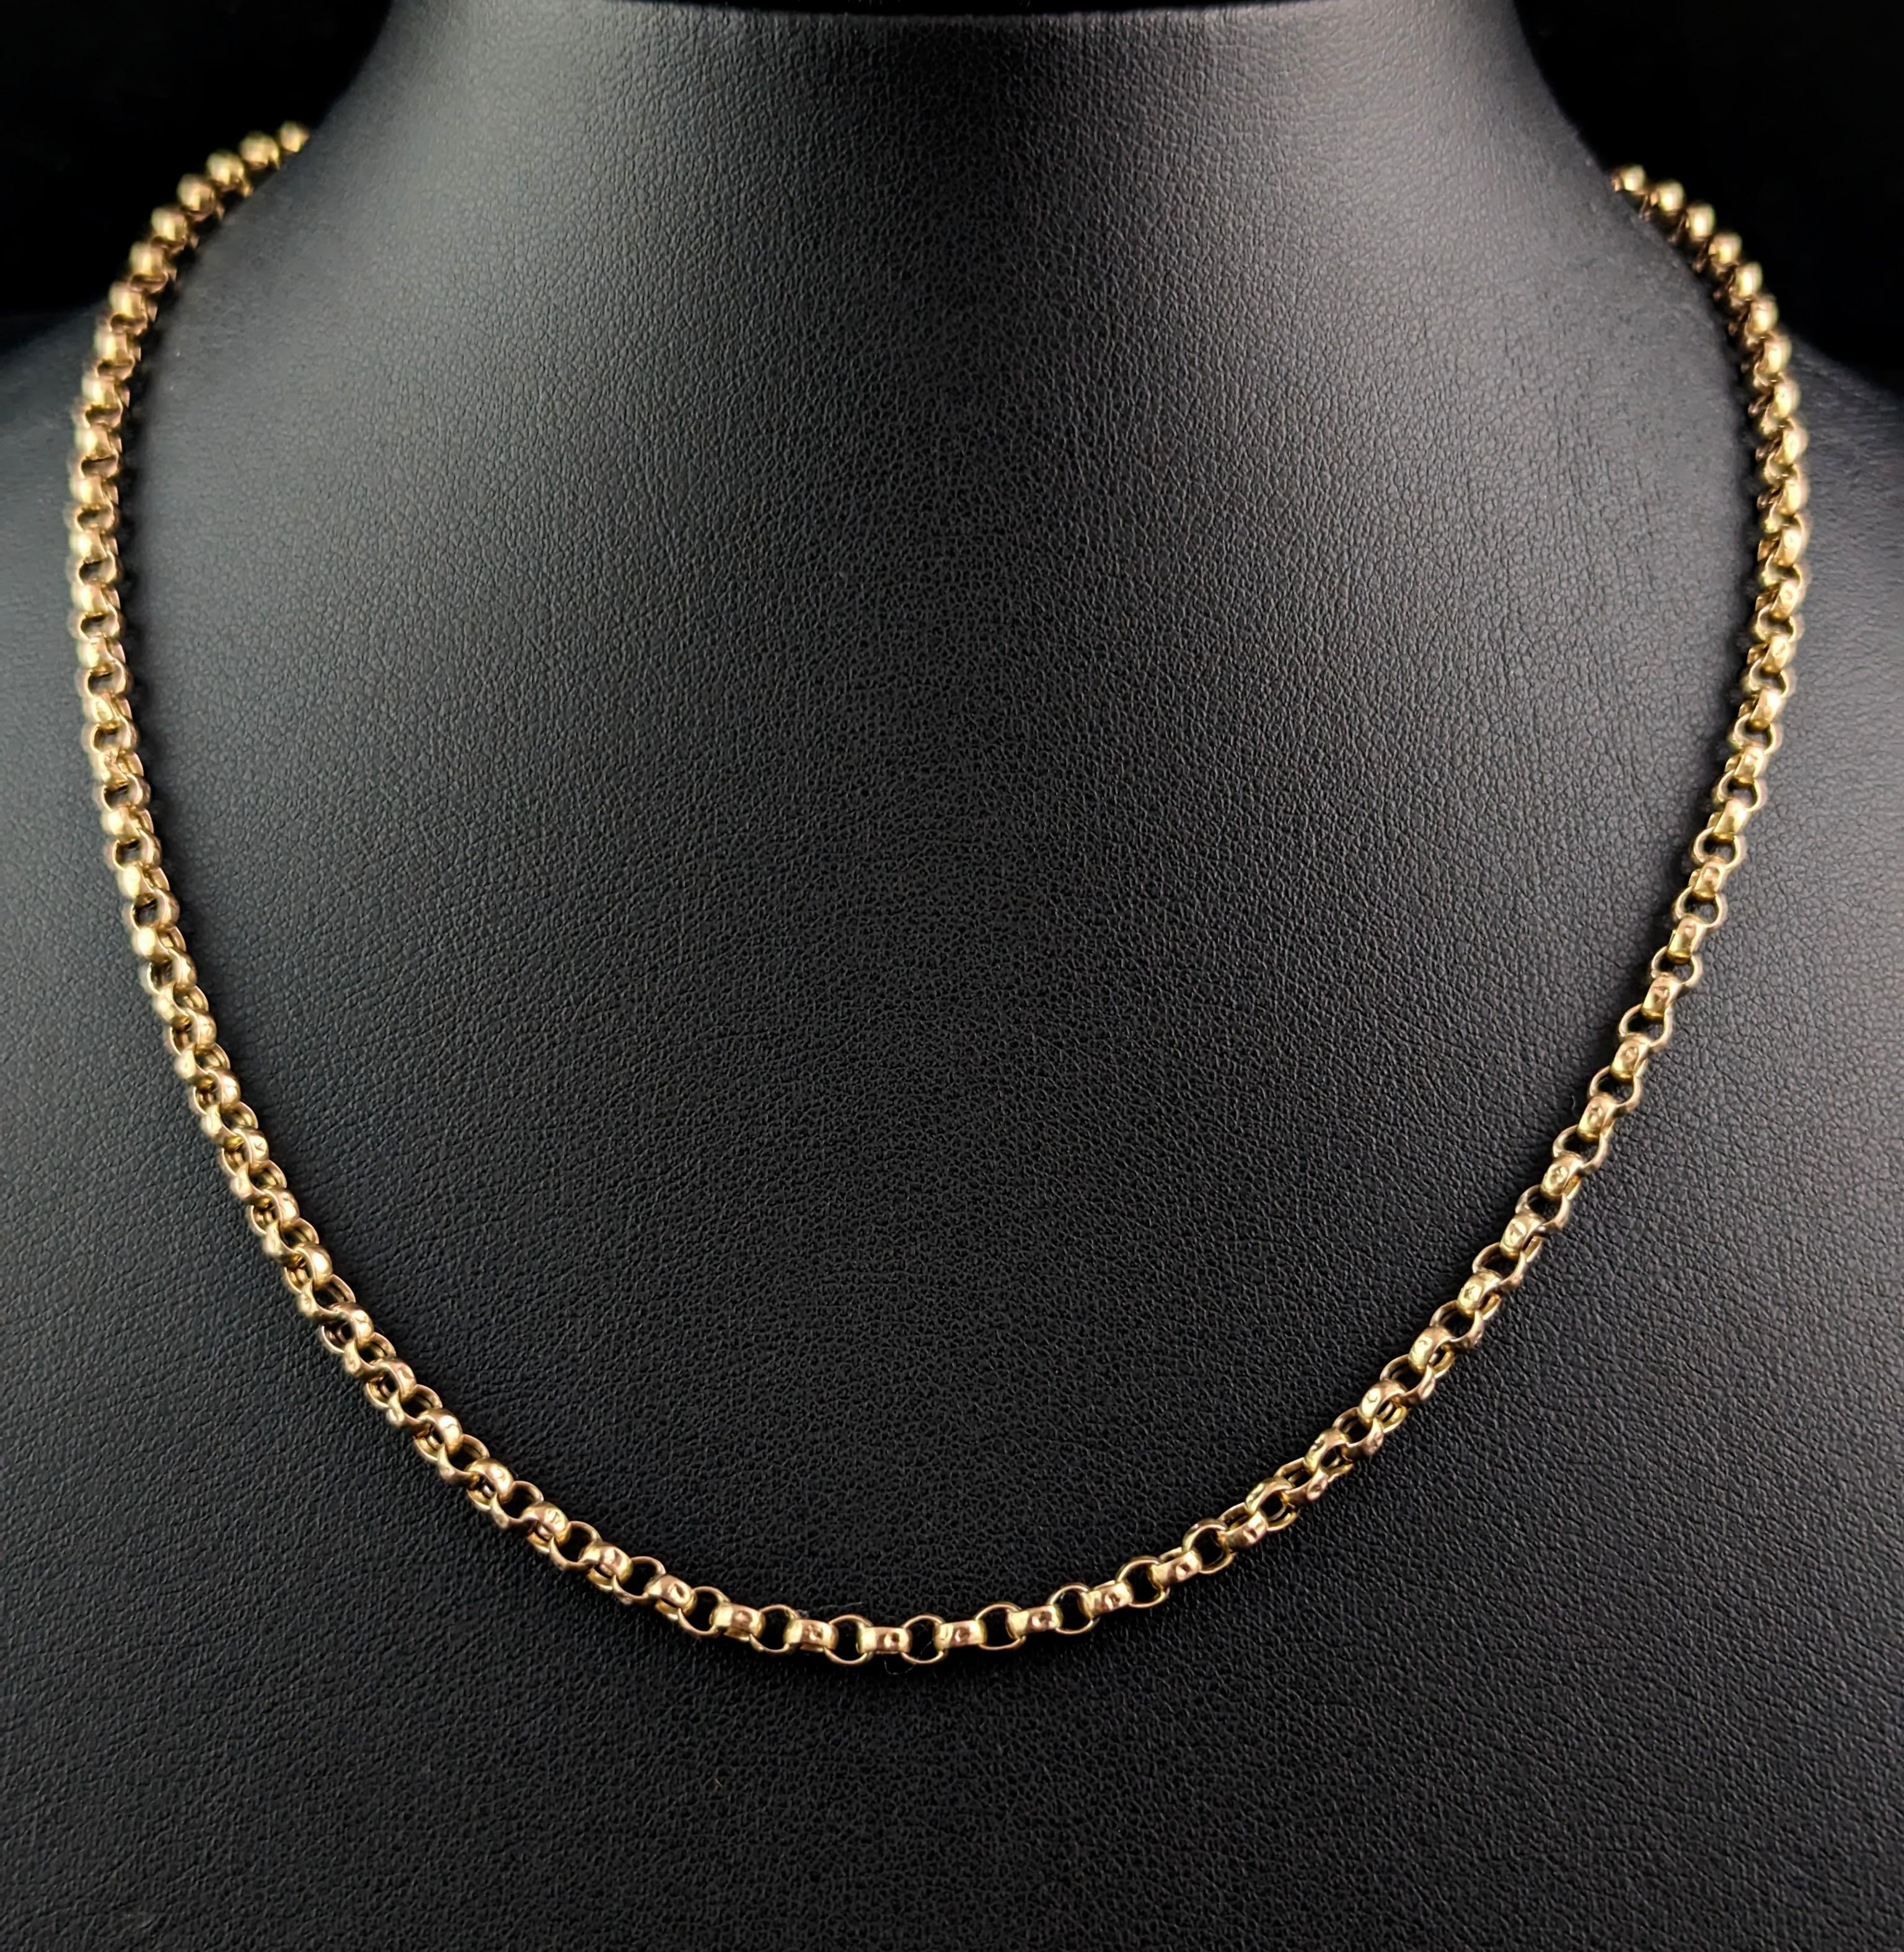 A beautiful antique, Edwardian era 9ct yellow gold Belcher or rolo link chain necklace.

Rich gold links with a pretty rolo or Belcher design, this classic beauty is a nice wearable length.

Perfect for adding your favourite charms, pendants or